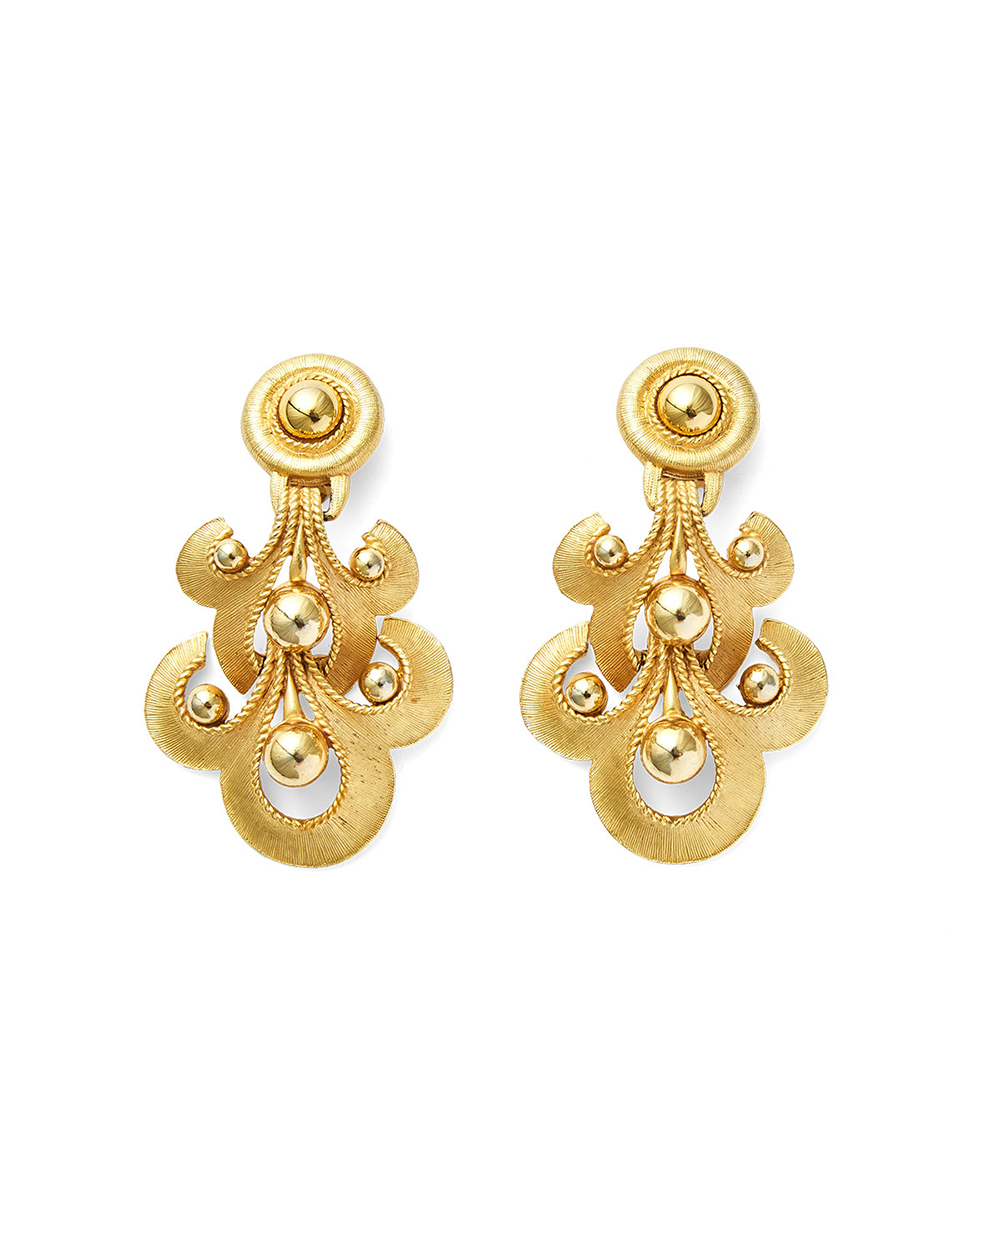 Love and Object earrings, $589